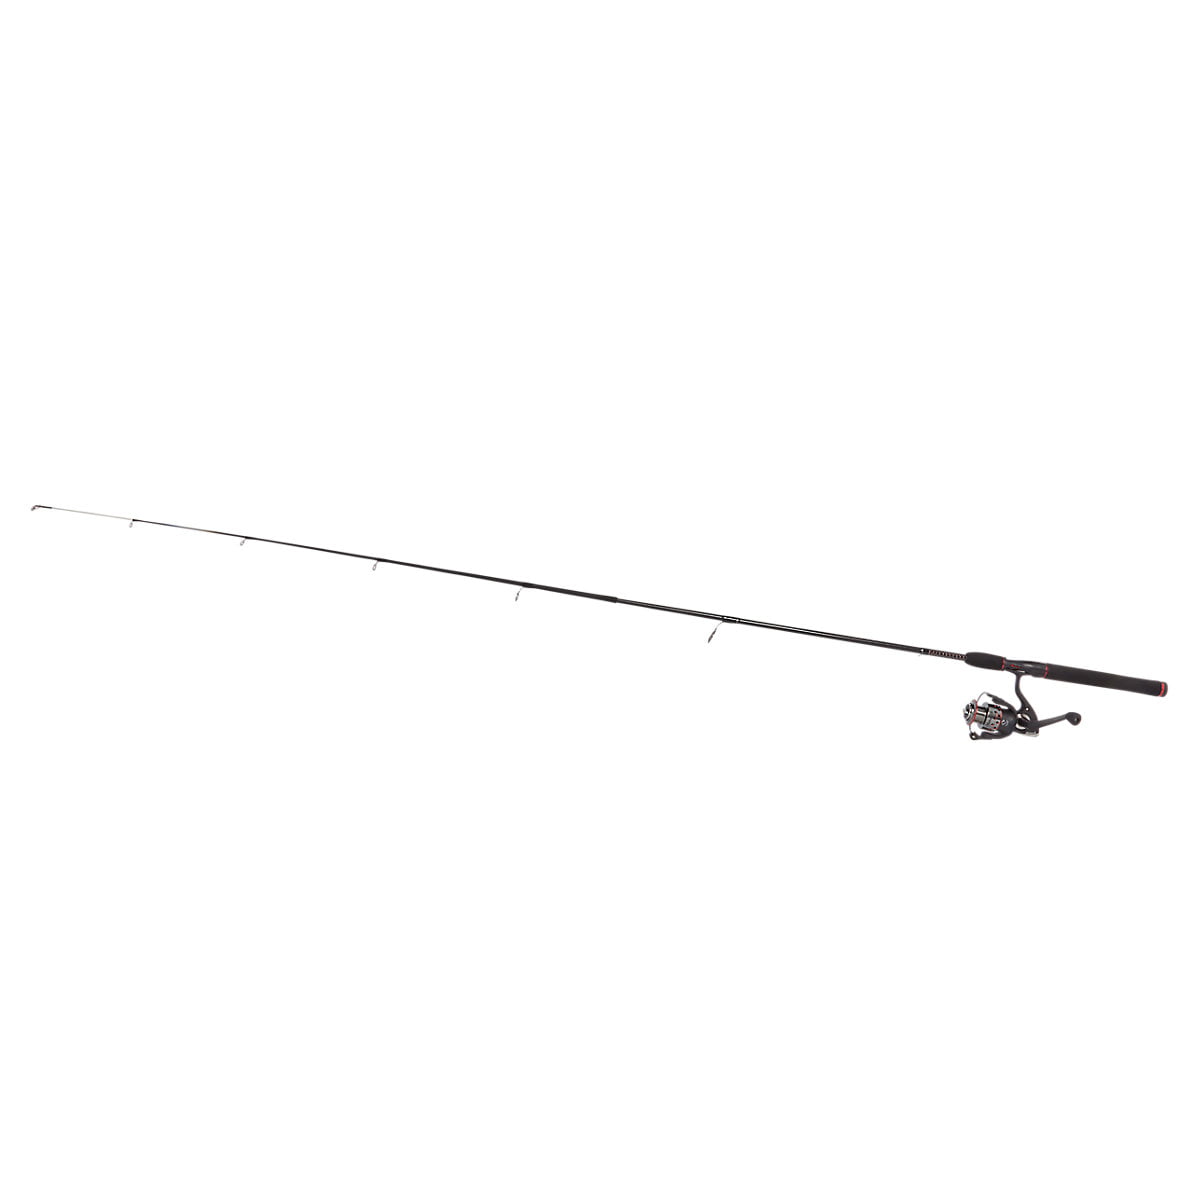 Ugly Stik 6’6” GX2 Spinning Fishing Rod and Reel Spinning Combo - image 4 of 20